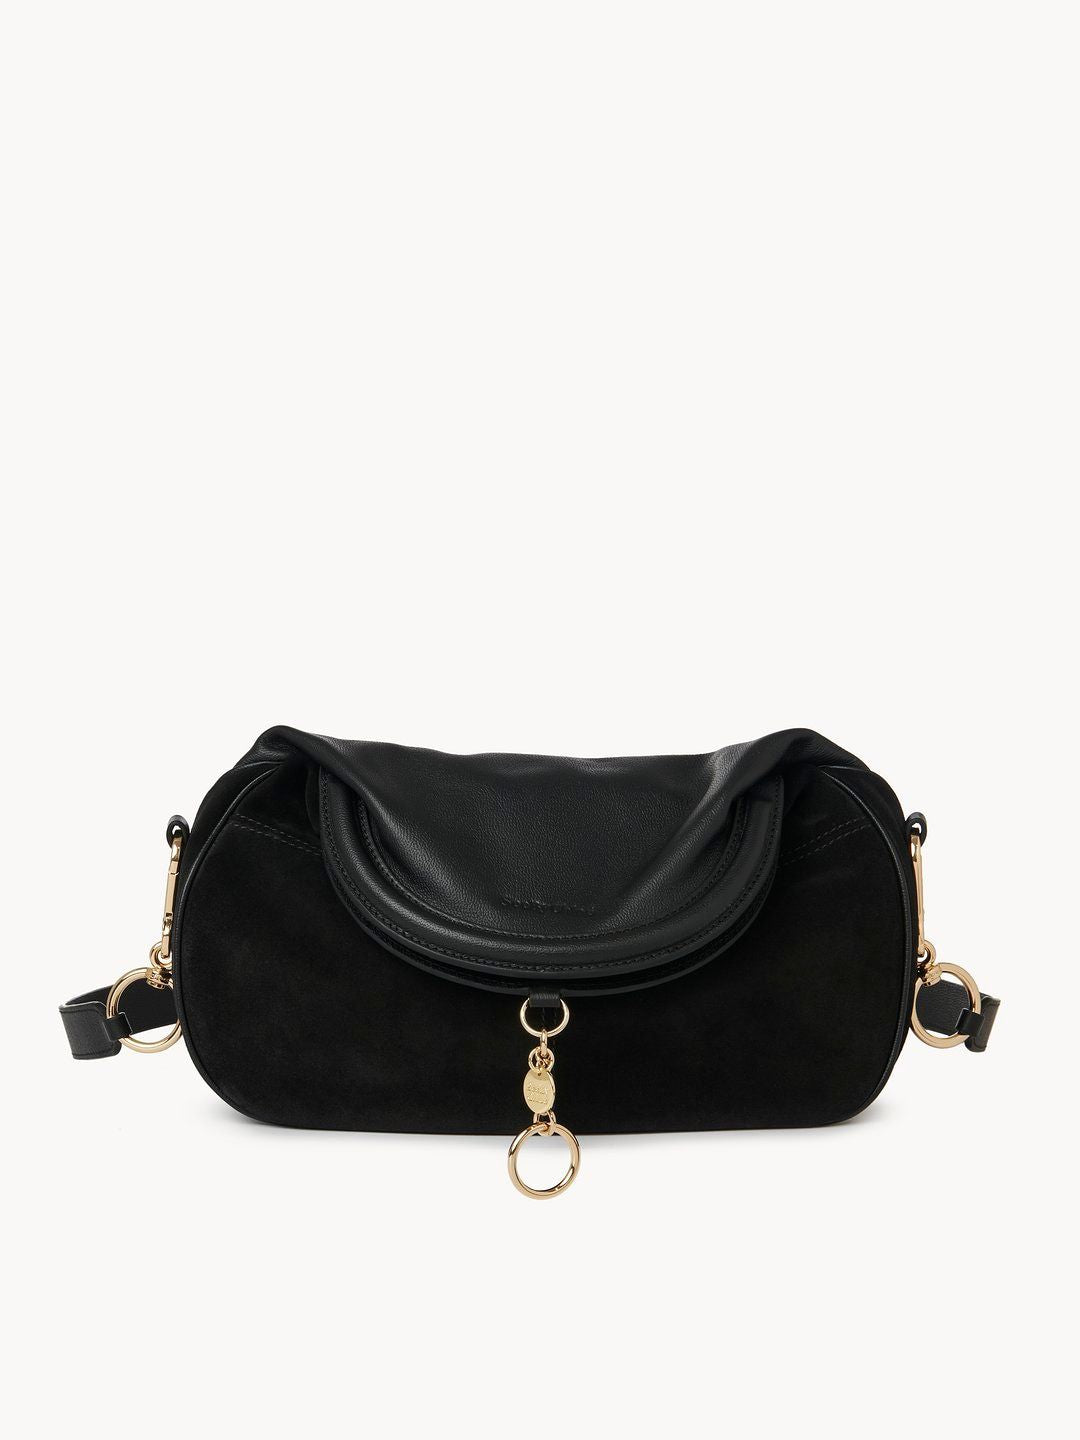 SEE BY CHLOÉ Black Shoulder Handbag for Women - FW23 Collection